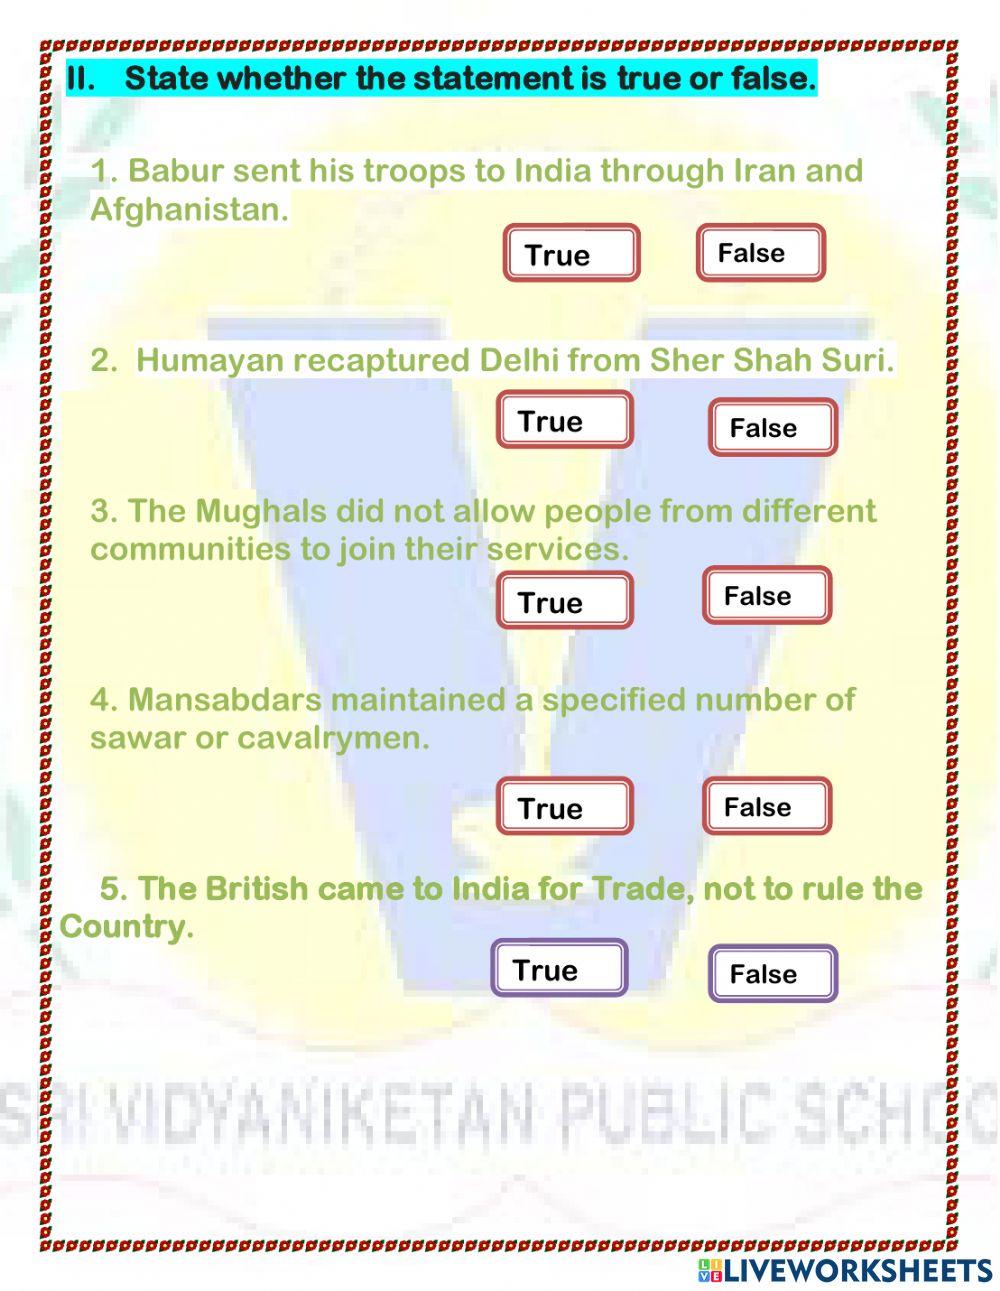 The Mughal Empire.